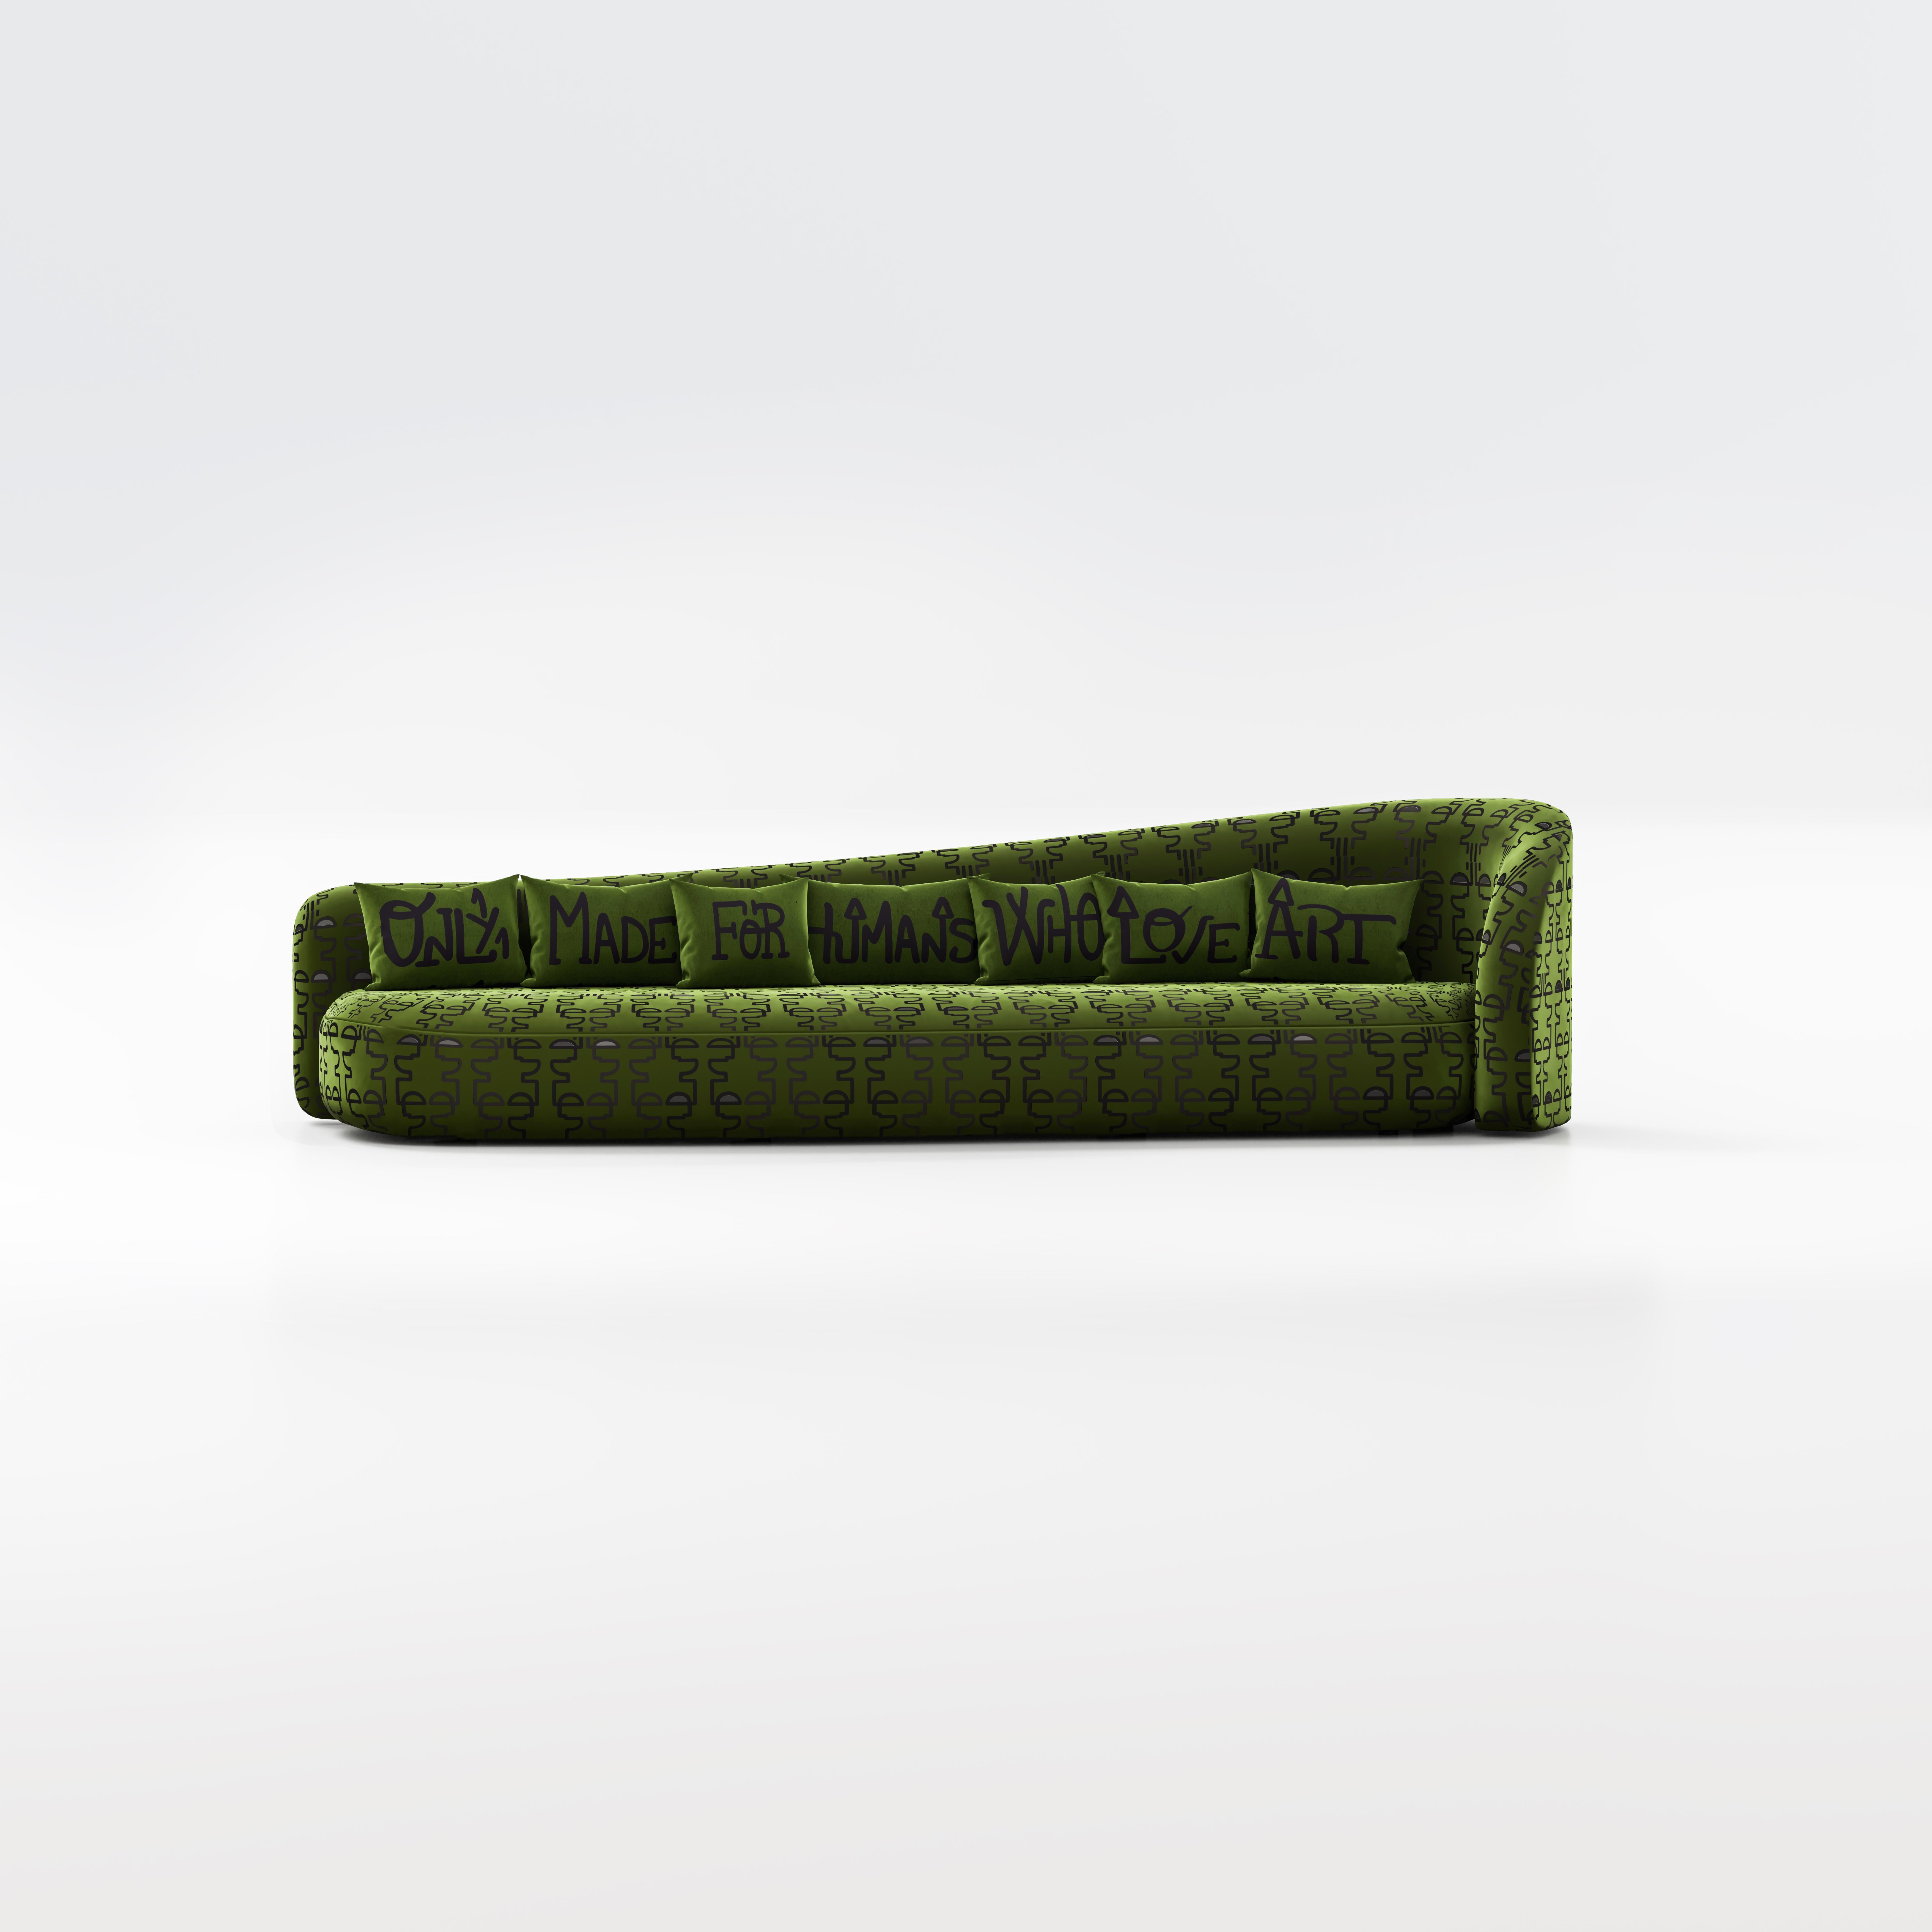 Amelia Daybed by Jérôme Bugara
Limited Edition Of 25 Pieces.
Dimensions: D 105,8 x W 335,2 x H 90,2 cm. SH: 46 cm.
Materials: Pierre Frey Teddy Mohair Fabric.

Signed, serial number and Certificate of Authenticity. Upholstered in jacquard with Marie